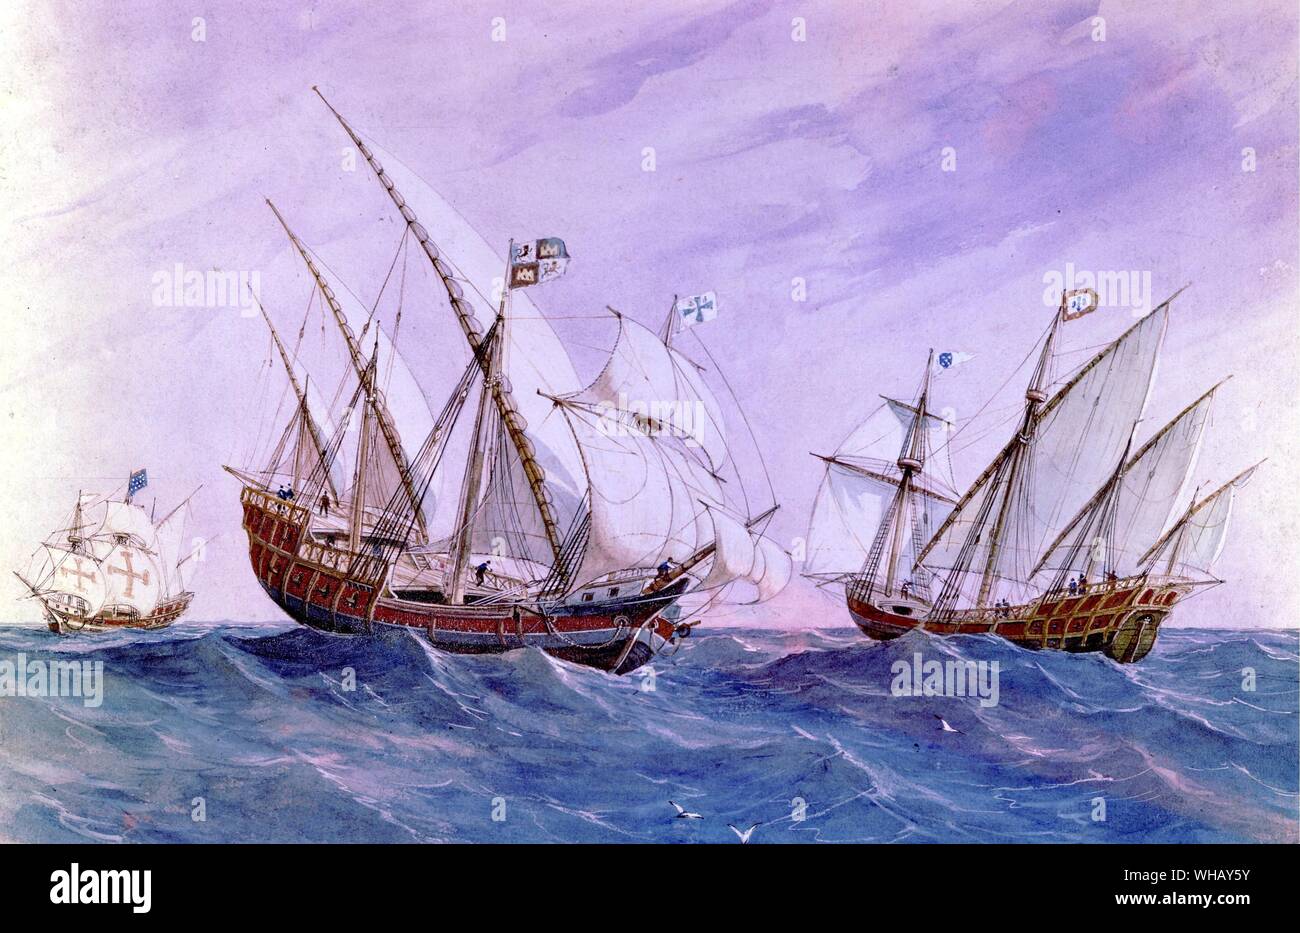 Spanish Caravels, 19th century. The Conquistadors by Hammond Innes, page 205.. The caravel was a small ship made of the common beachwood found on the shores of Europe. These ships had three masts, the mizzen carrying a lateen sail, while the fore and main were square rigged. Larger ones had a square rigged foremast, while the main, mizzen and bonaventure were lateen rigged. Christopher Columbus' Pinta and Nina were caravels. Also, Vasco Da Gama and other Portuguese explorers used the caravel to reach India via the Cape of Good Hope. Caravels were capable ships and ideal for the first voyages Stock Photo